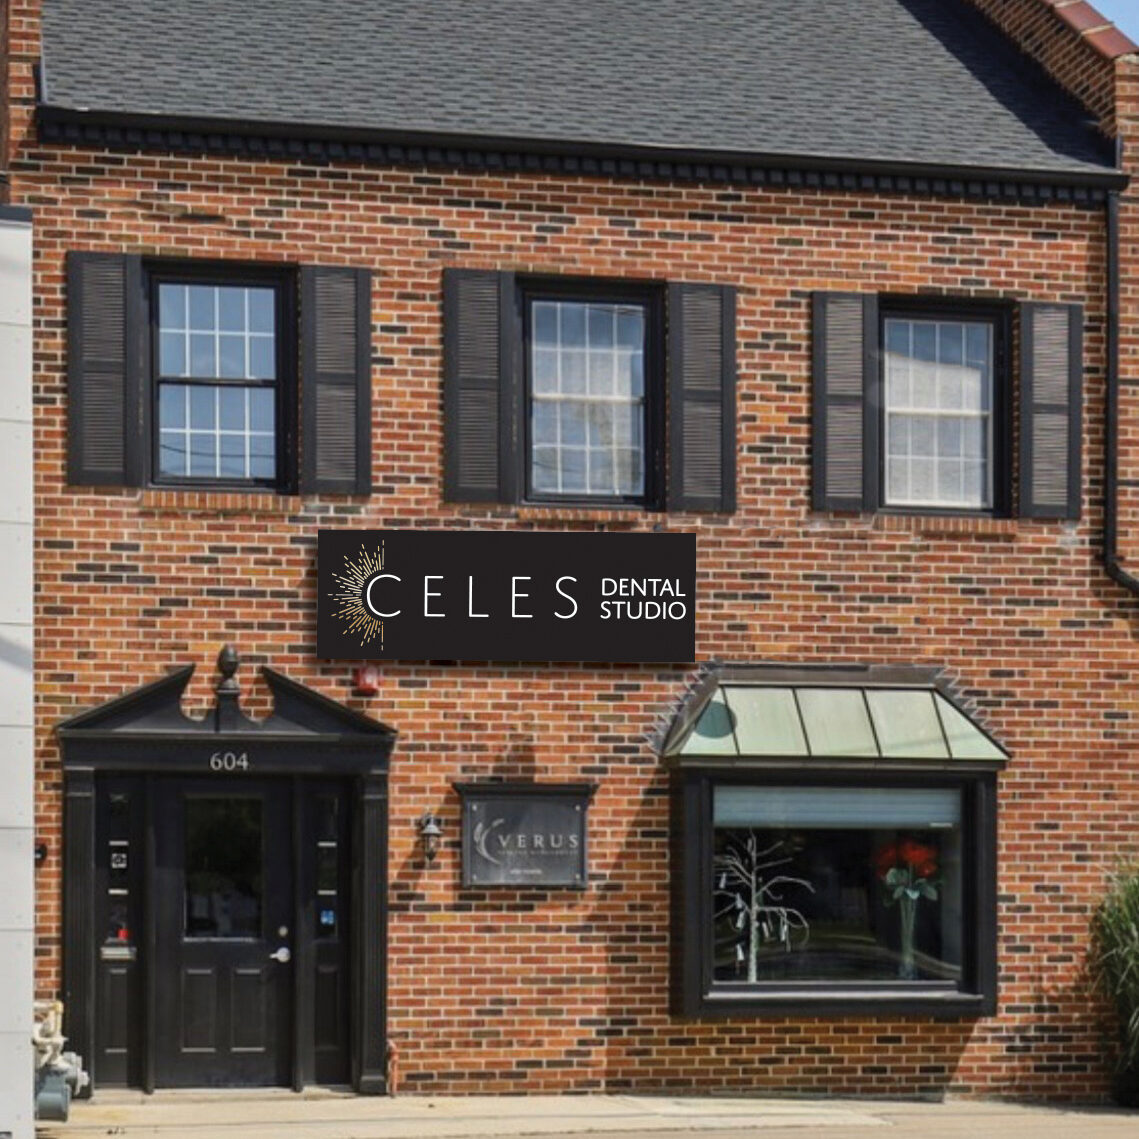 Exterior view of Celes Dental Studio, a brick building with black shutters and awning, located at 604 in Western Springs, IL